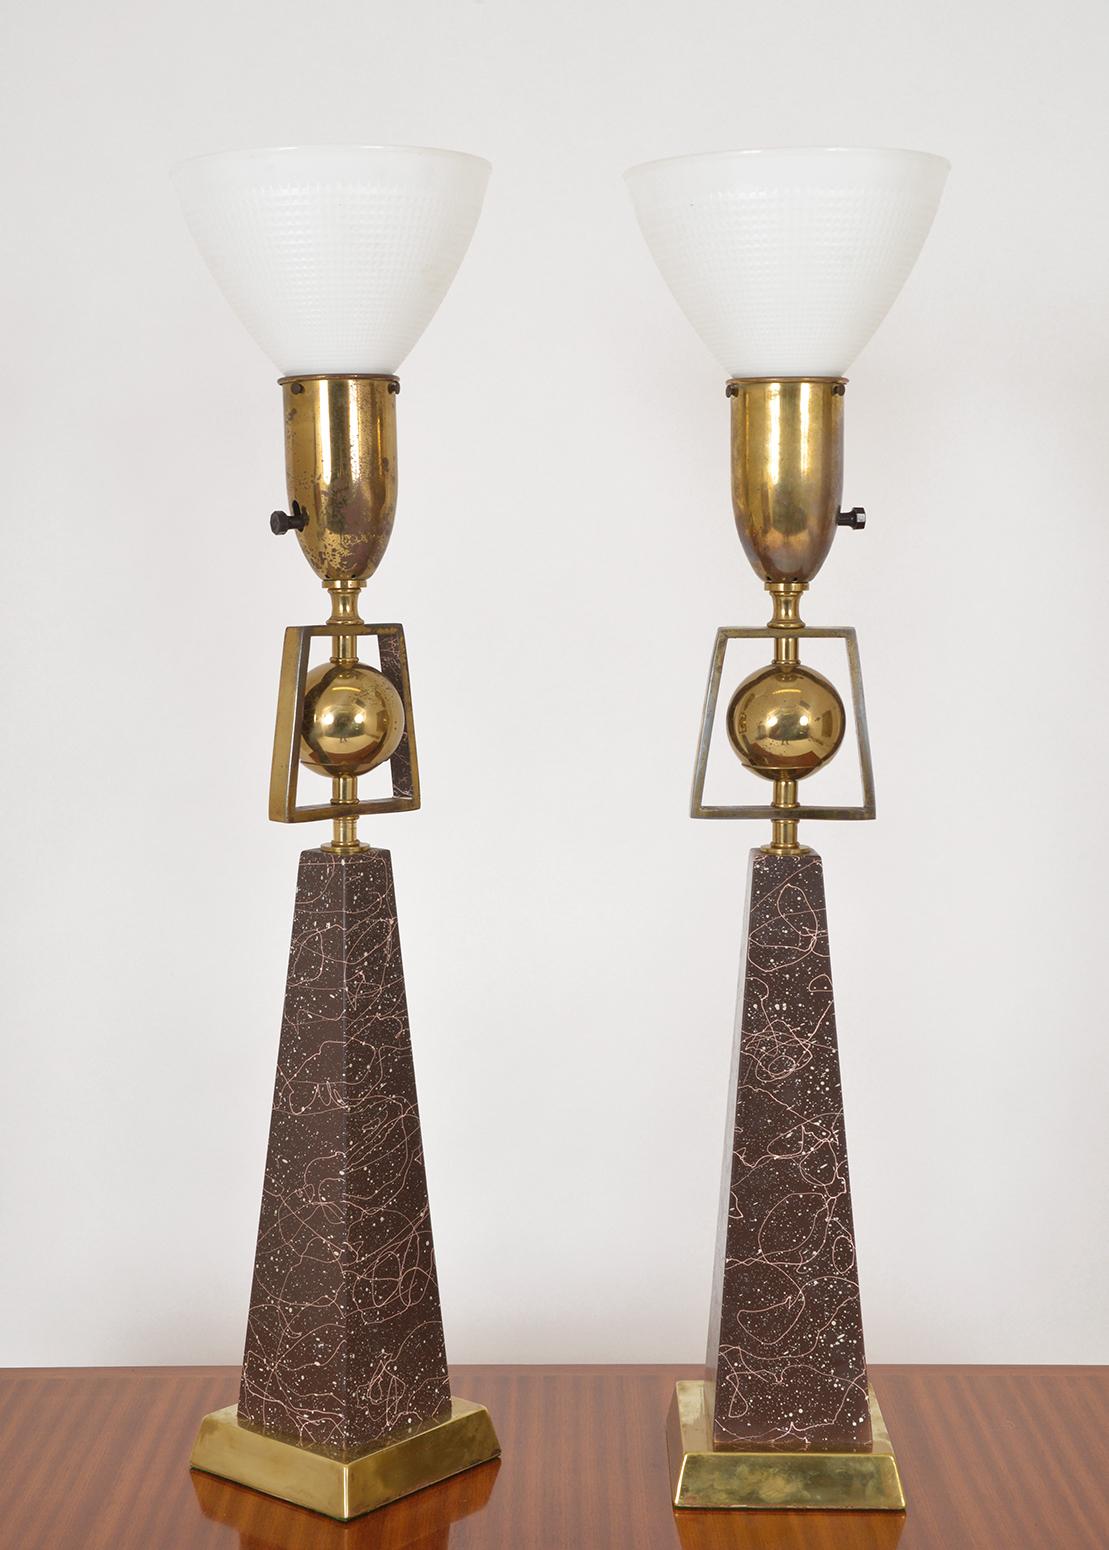 Brass Pair of American Mid-Century Modern Obelisk Table Lamps by Rembrandt Lighting